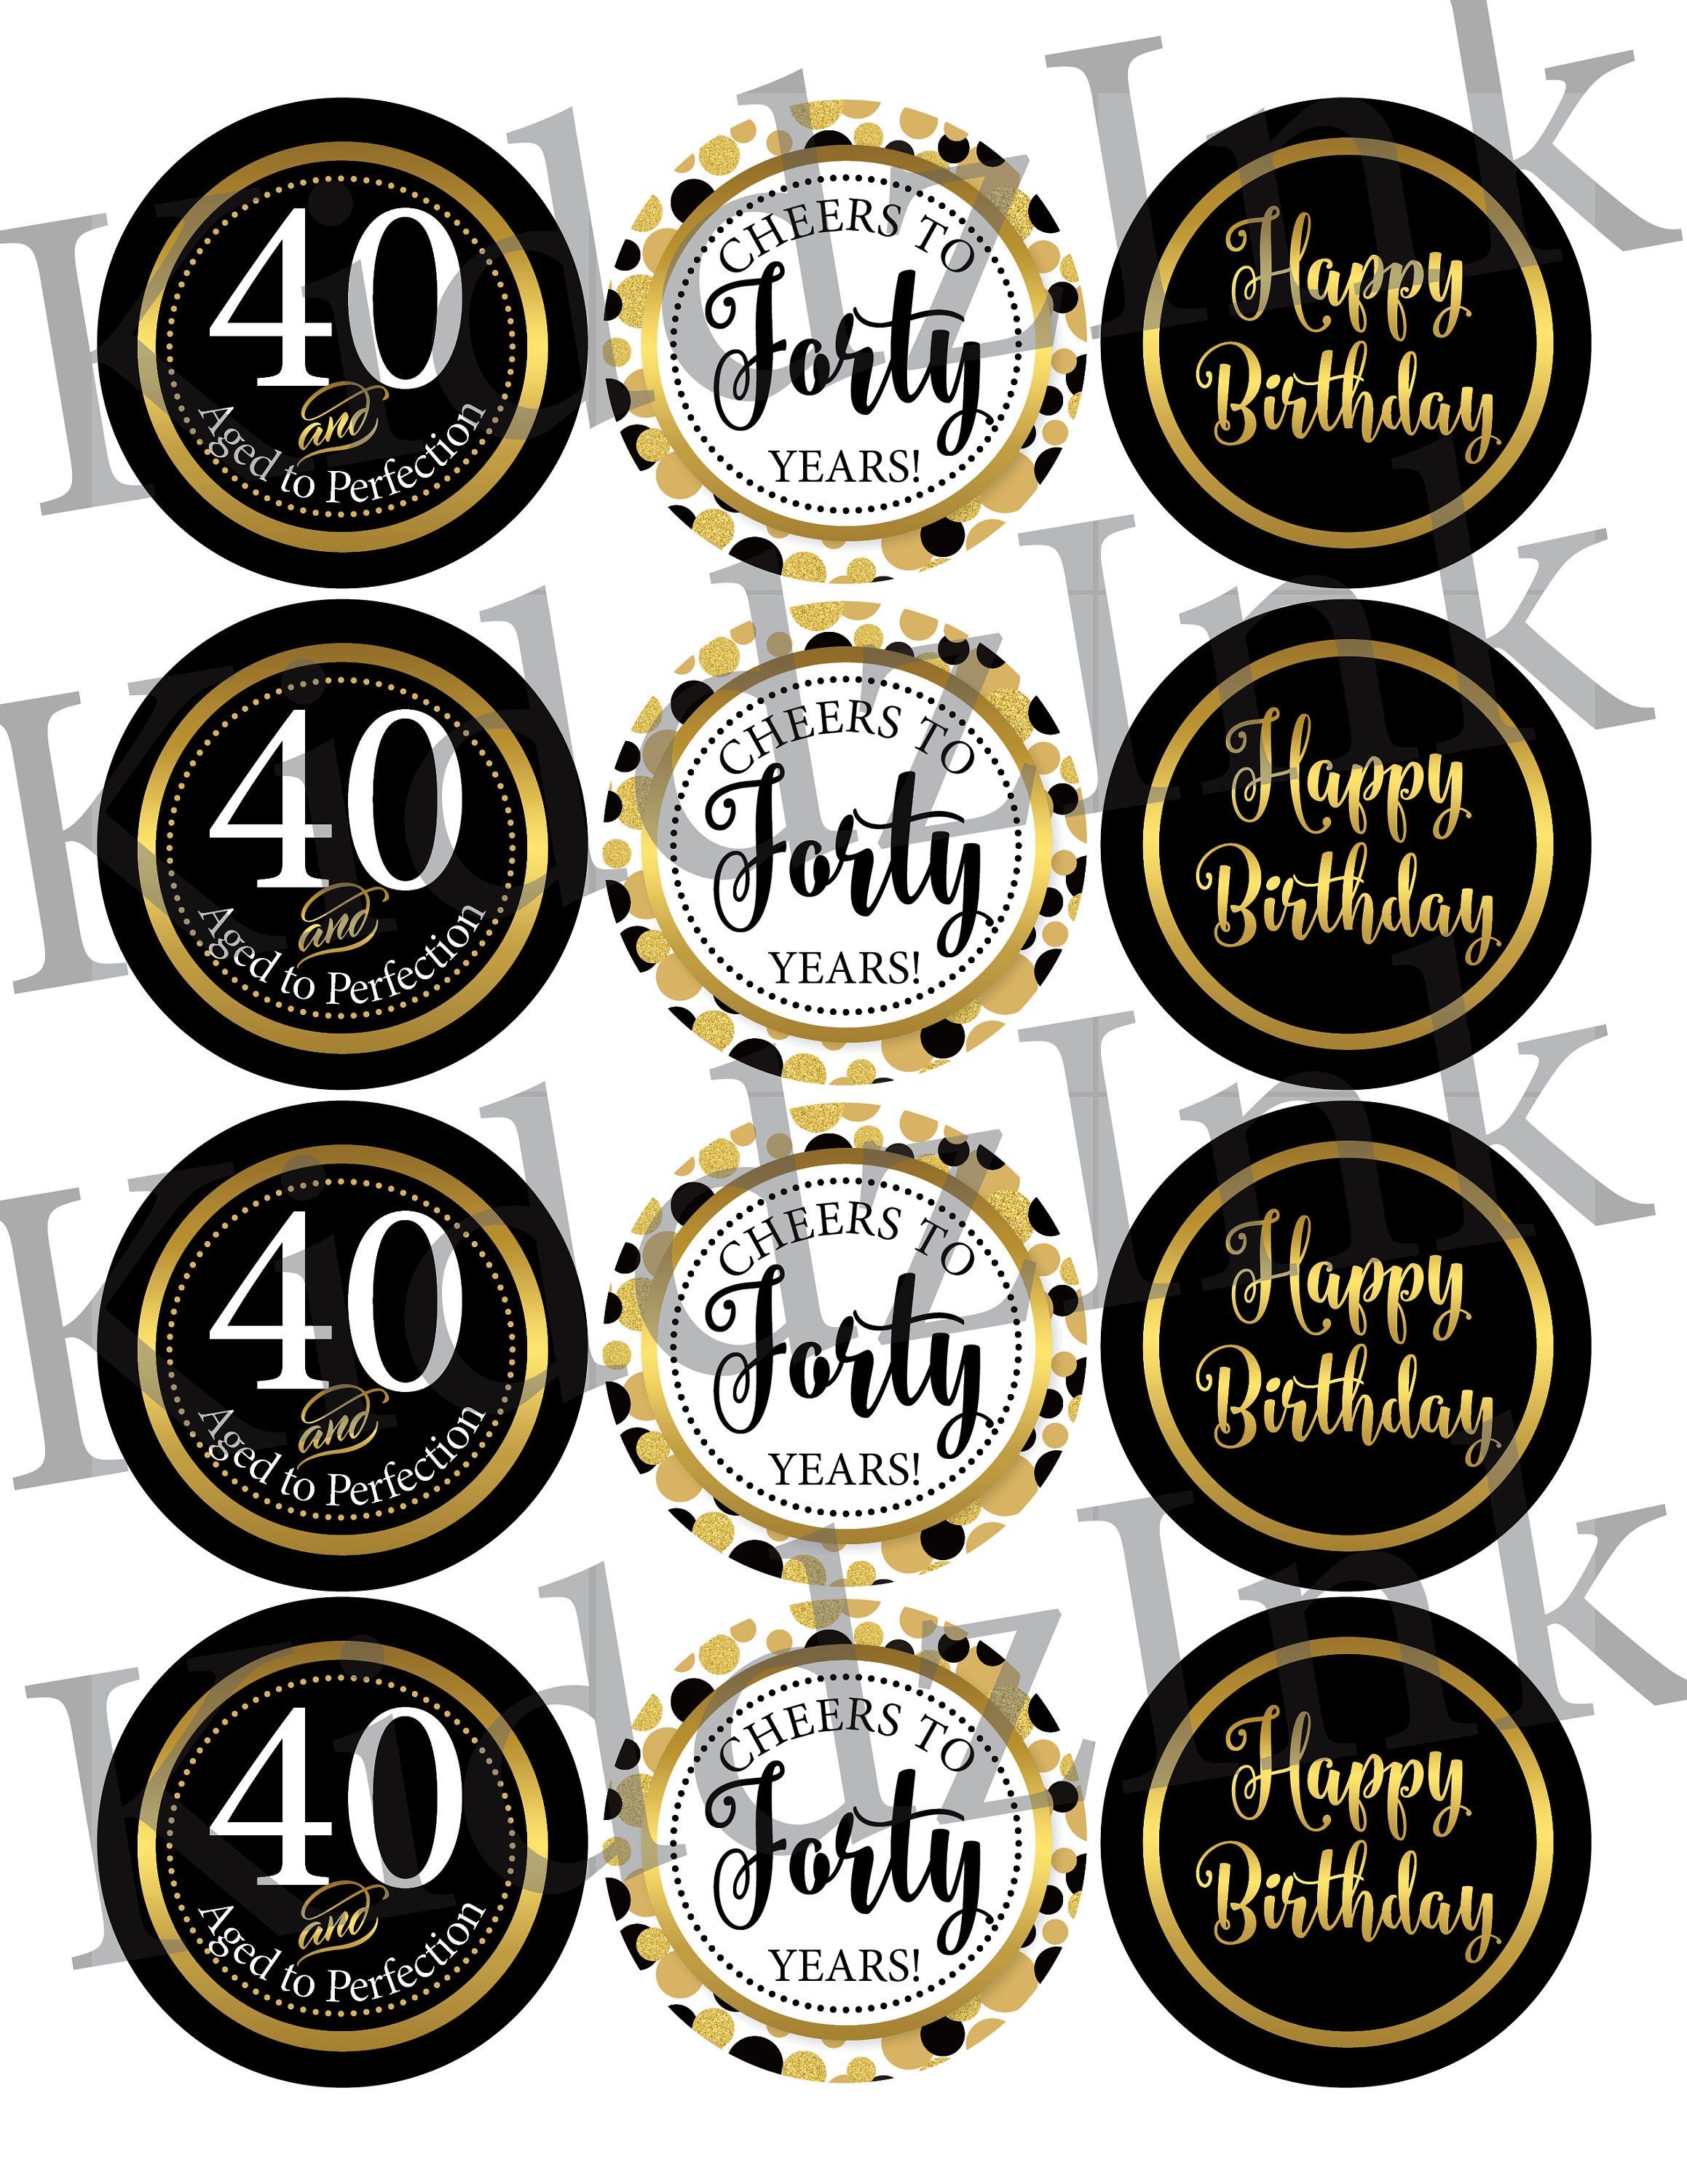 Printable Happy Birthday Cupcake Toppers Black and Gold - Digital Art Star